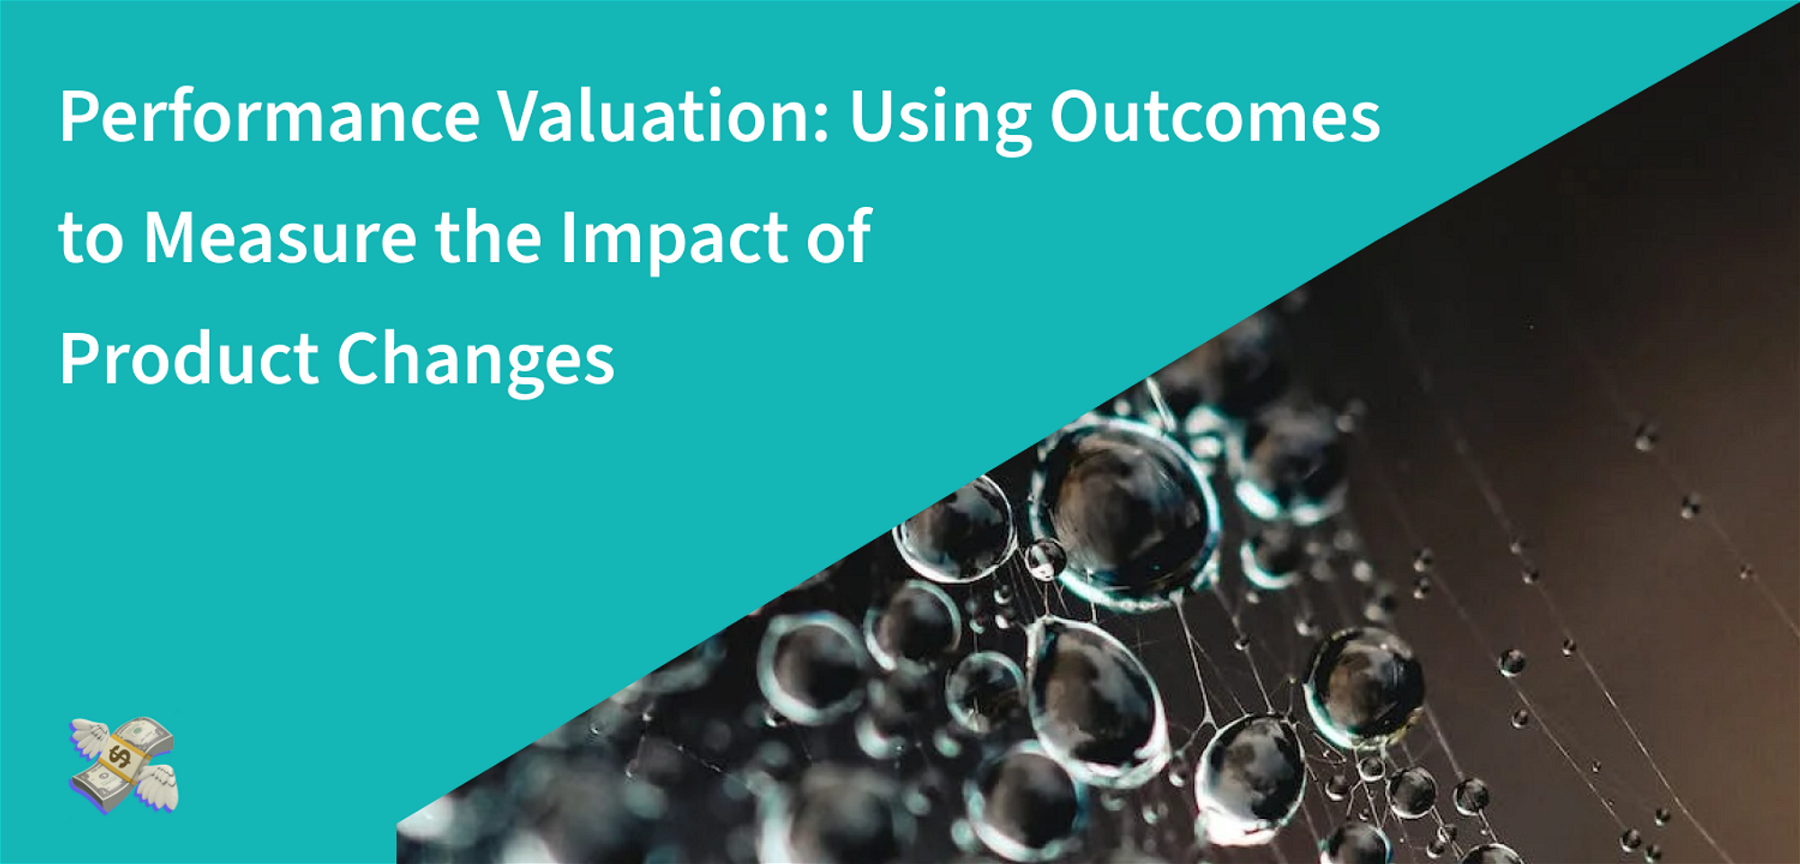 Performance Valuation: Using Outcomes to Measure the Impact of Product Changes